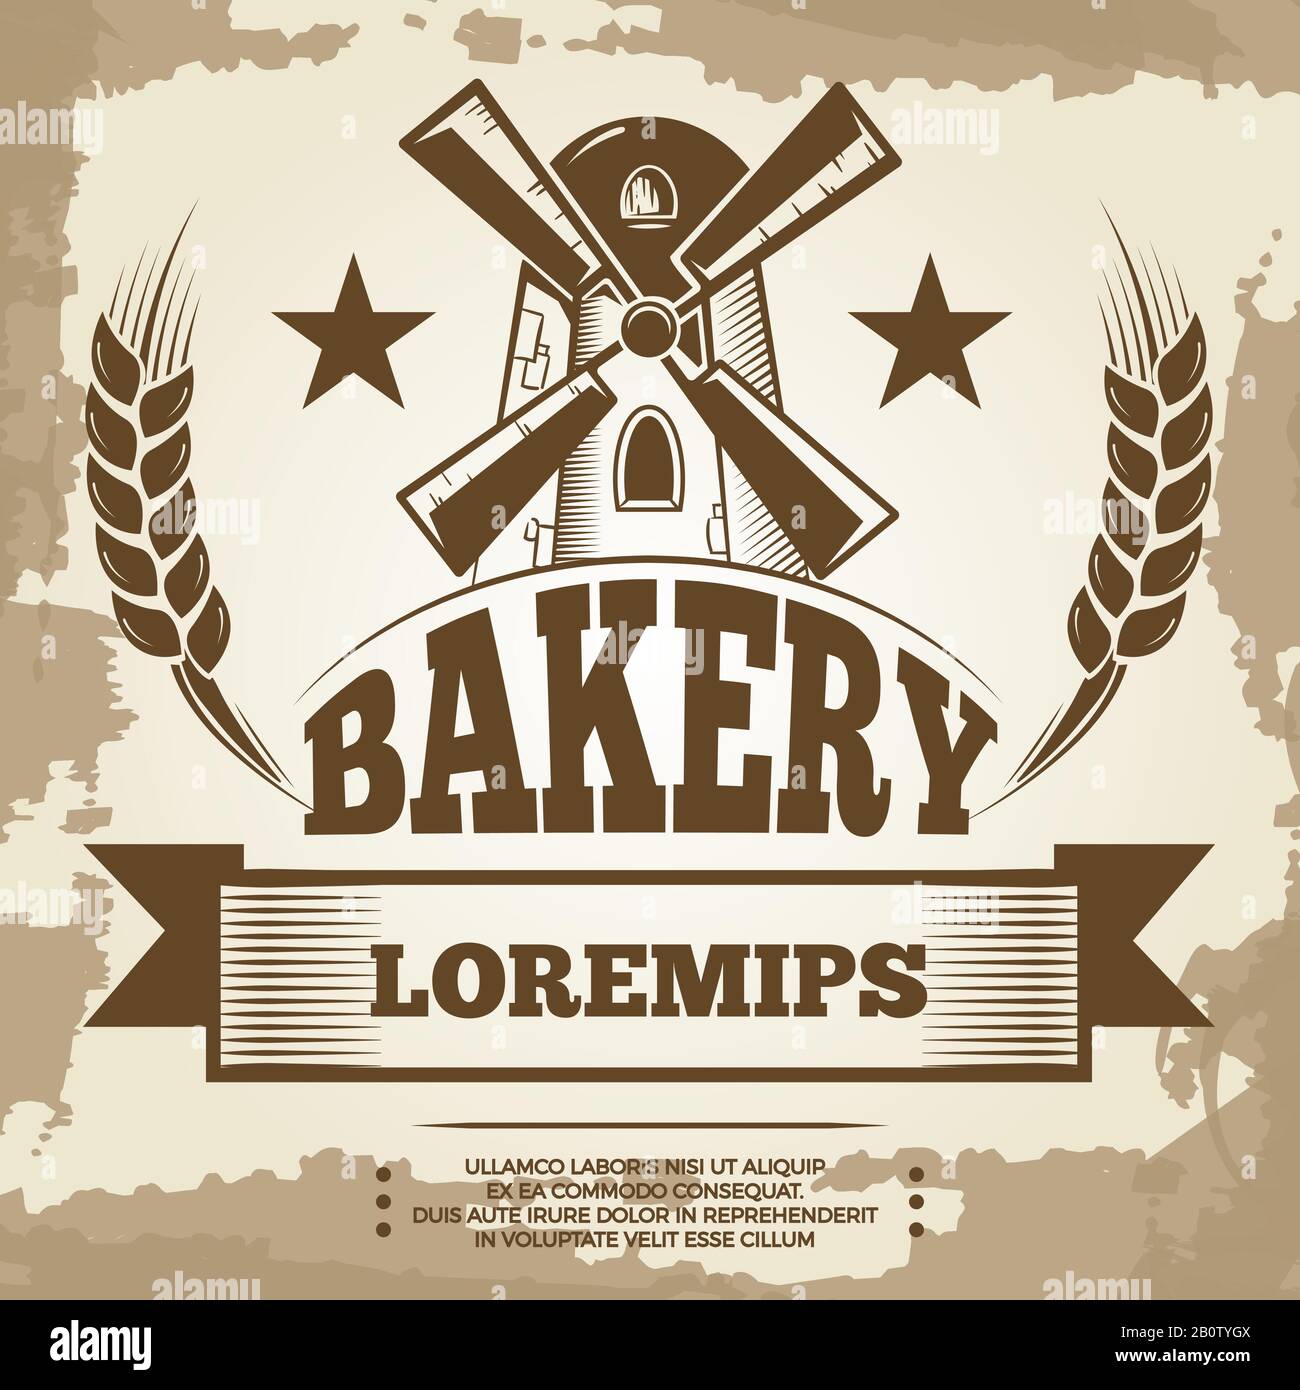 Vintage bakery poster design - bakery label with mill and wheat. Banner bakery vector illustration Stock Vector